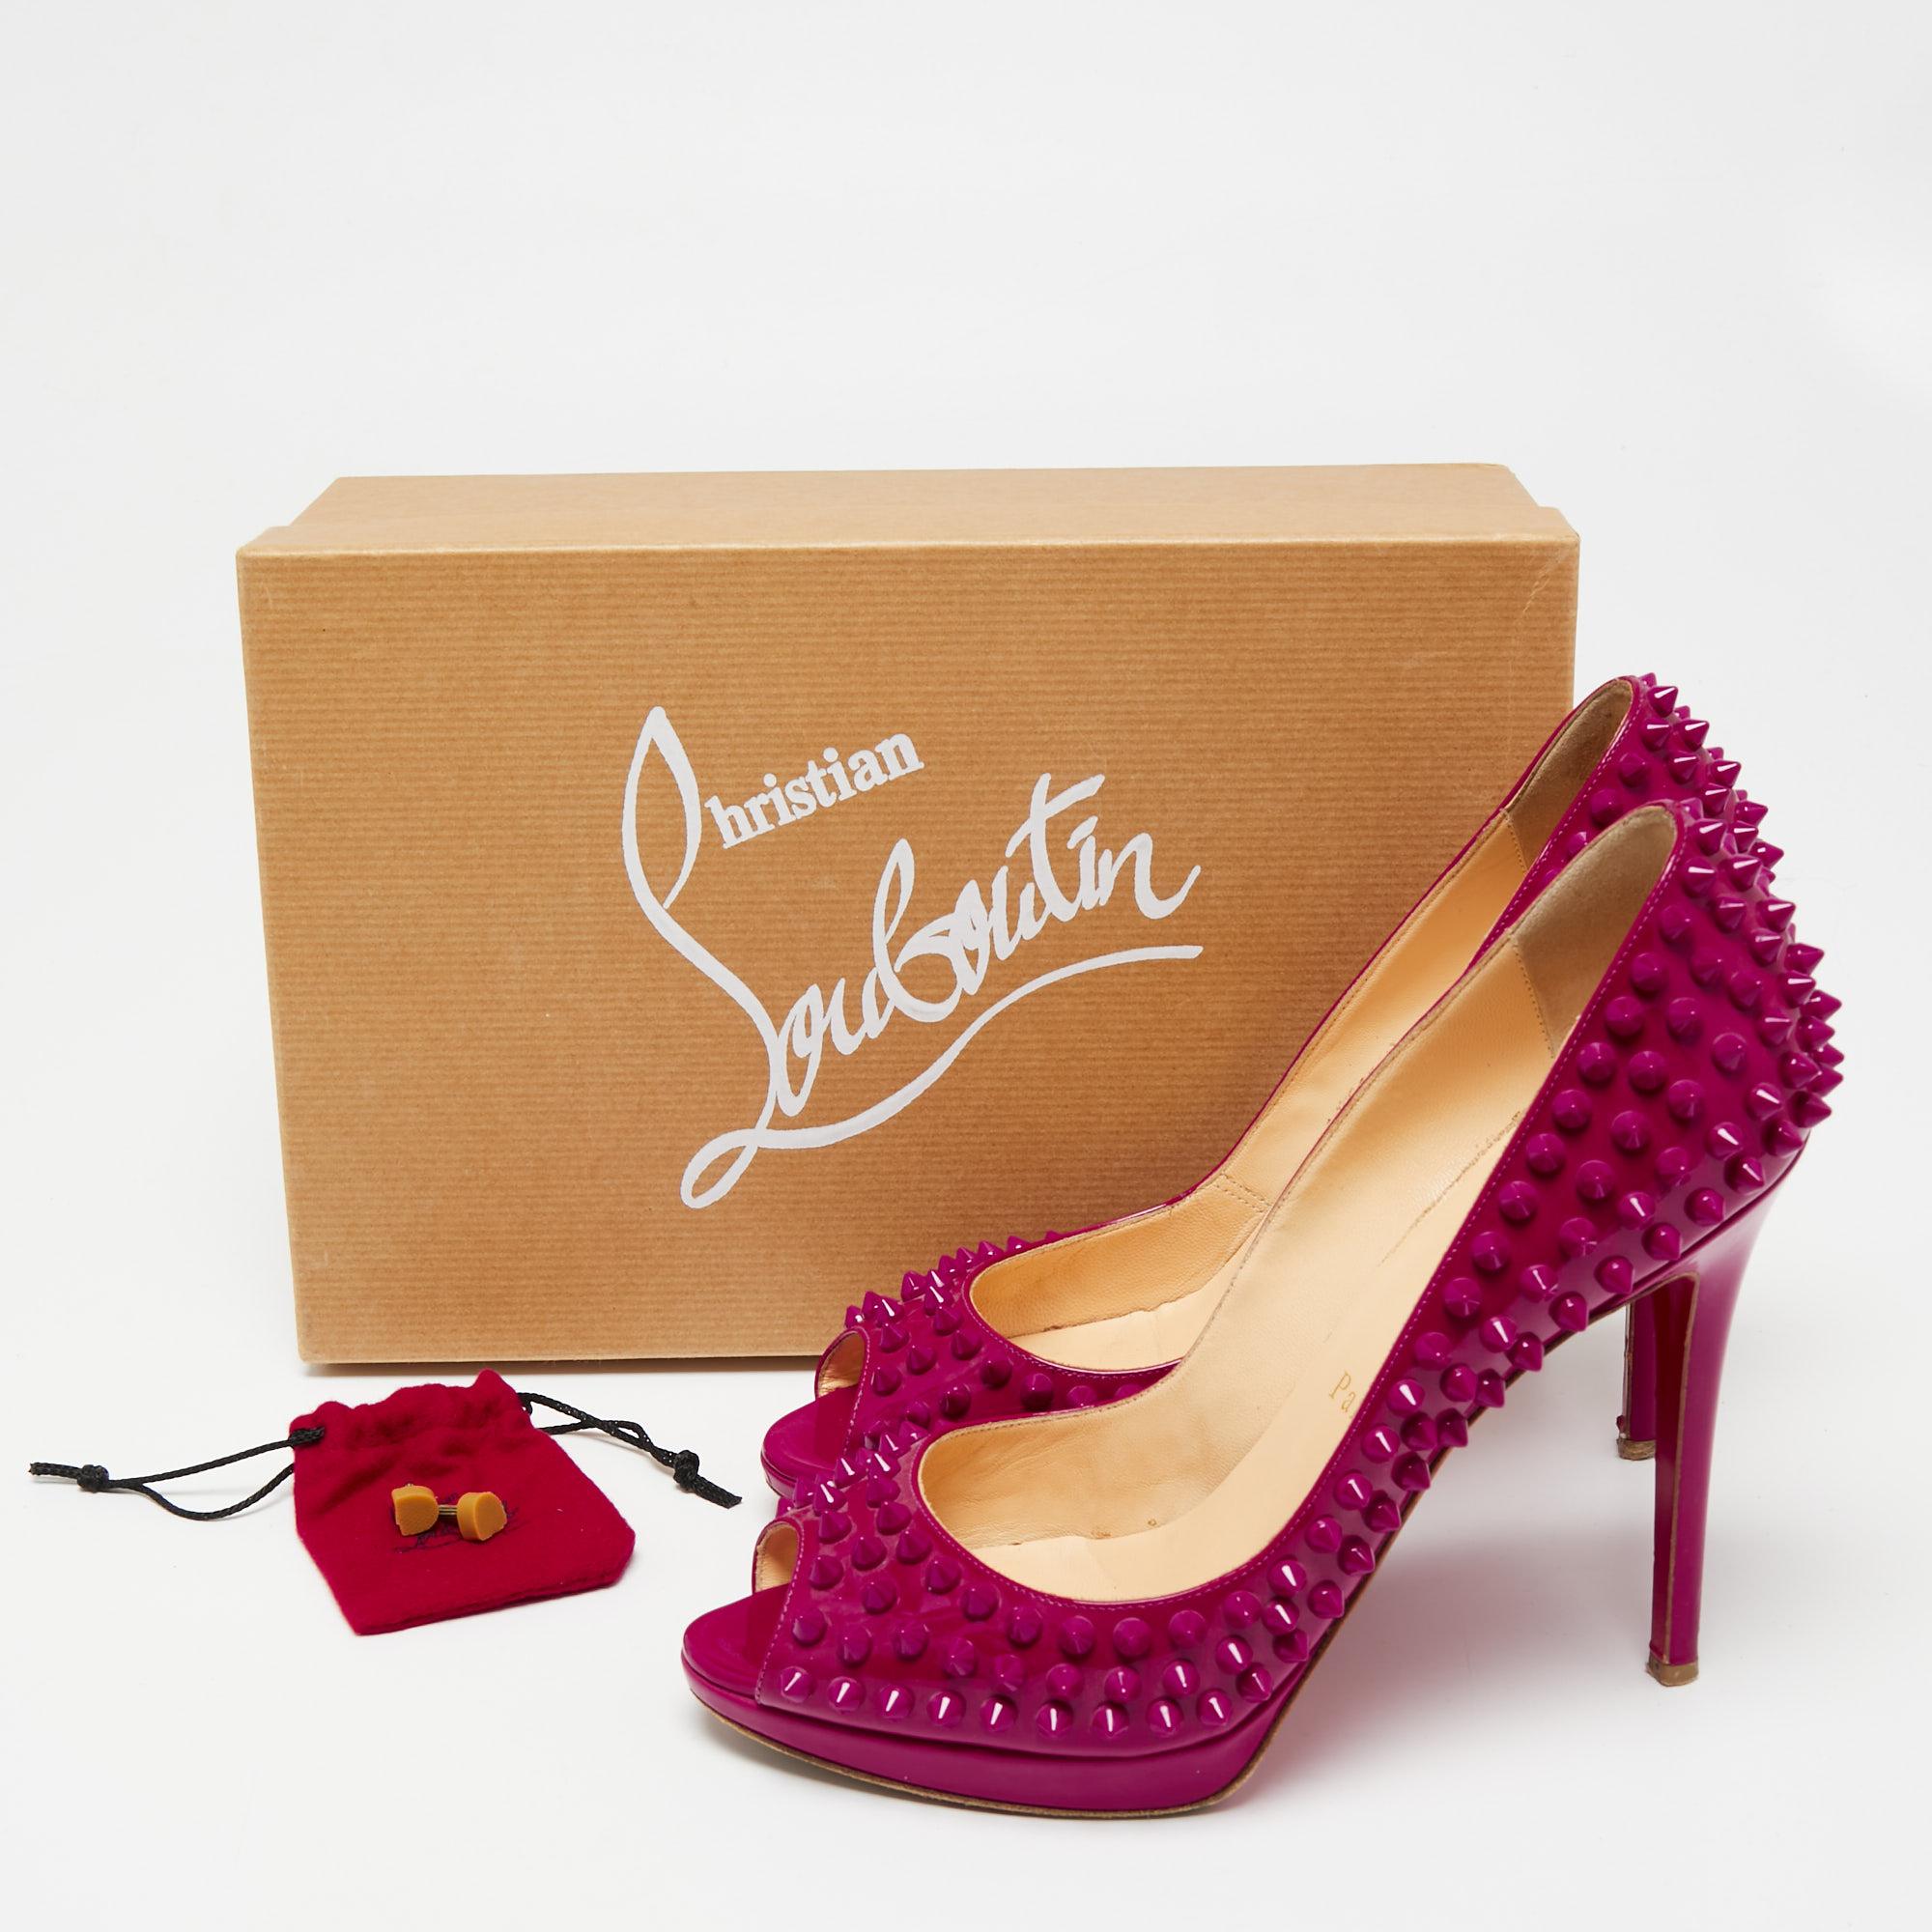 Christian Louboutin Patent Leather Yolanda Spiked Peep-Toe Pumps Size 38.5 For Sale 4